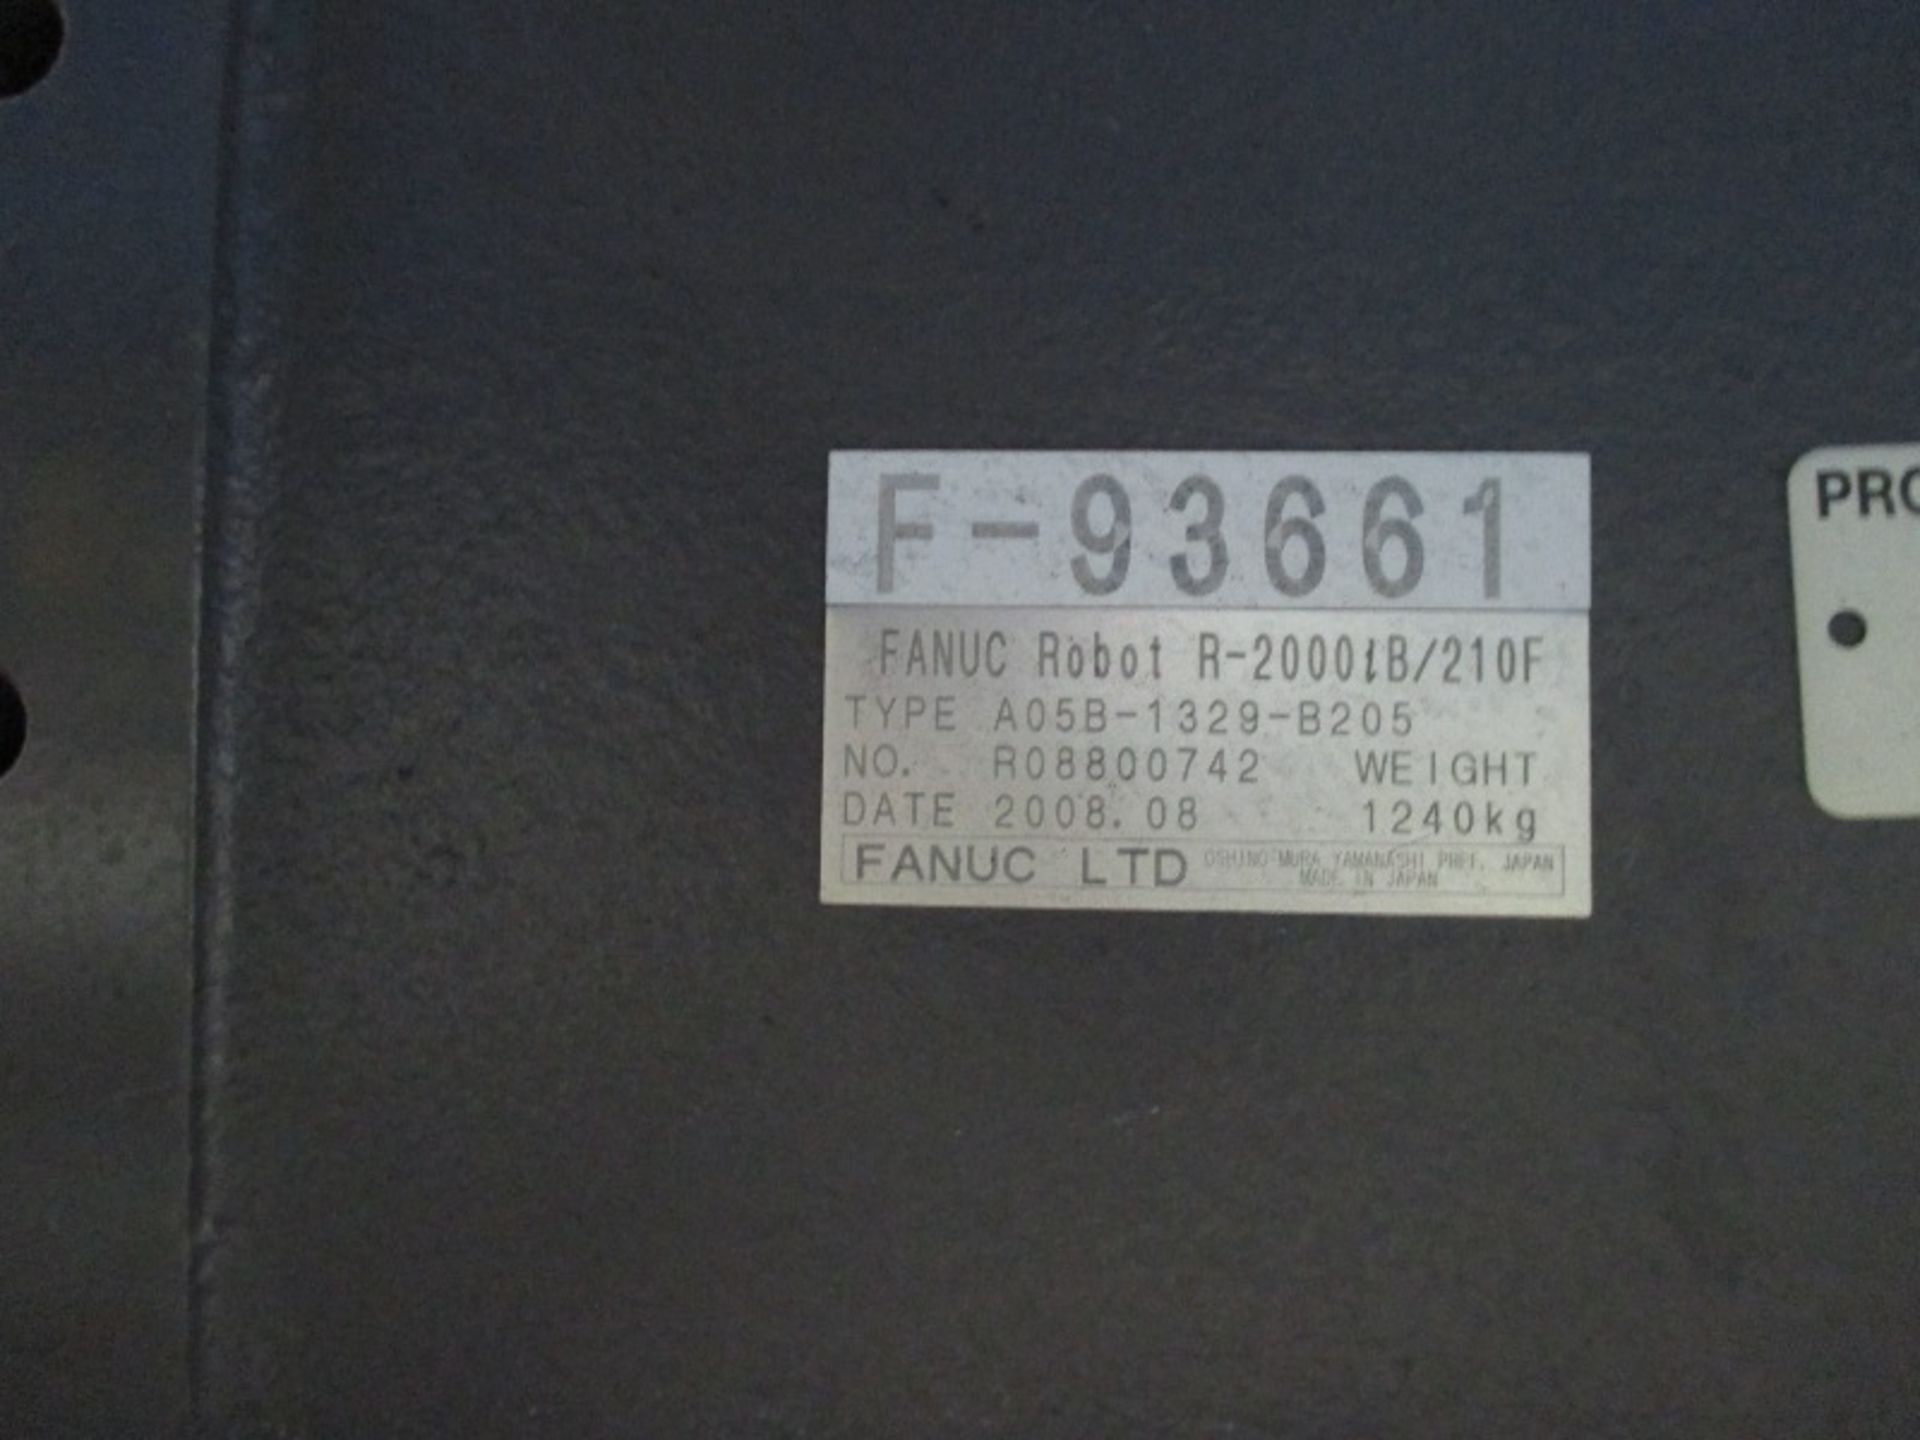 FANUC ROBOT R-2000iB/210F R-30iA CONTROL WITH CABLES AND TEACH PENDANT, SN 93661, YEAR 2008 - Image 6 of 6